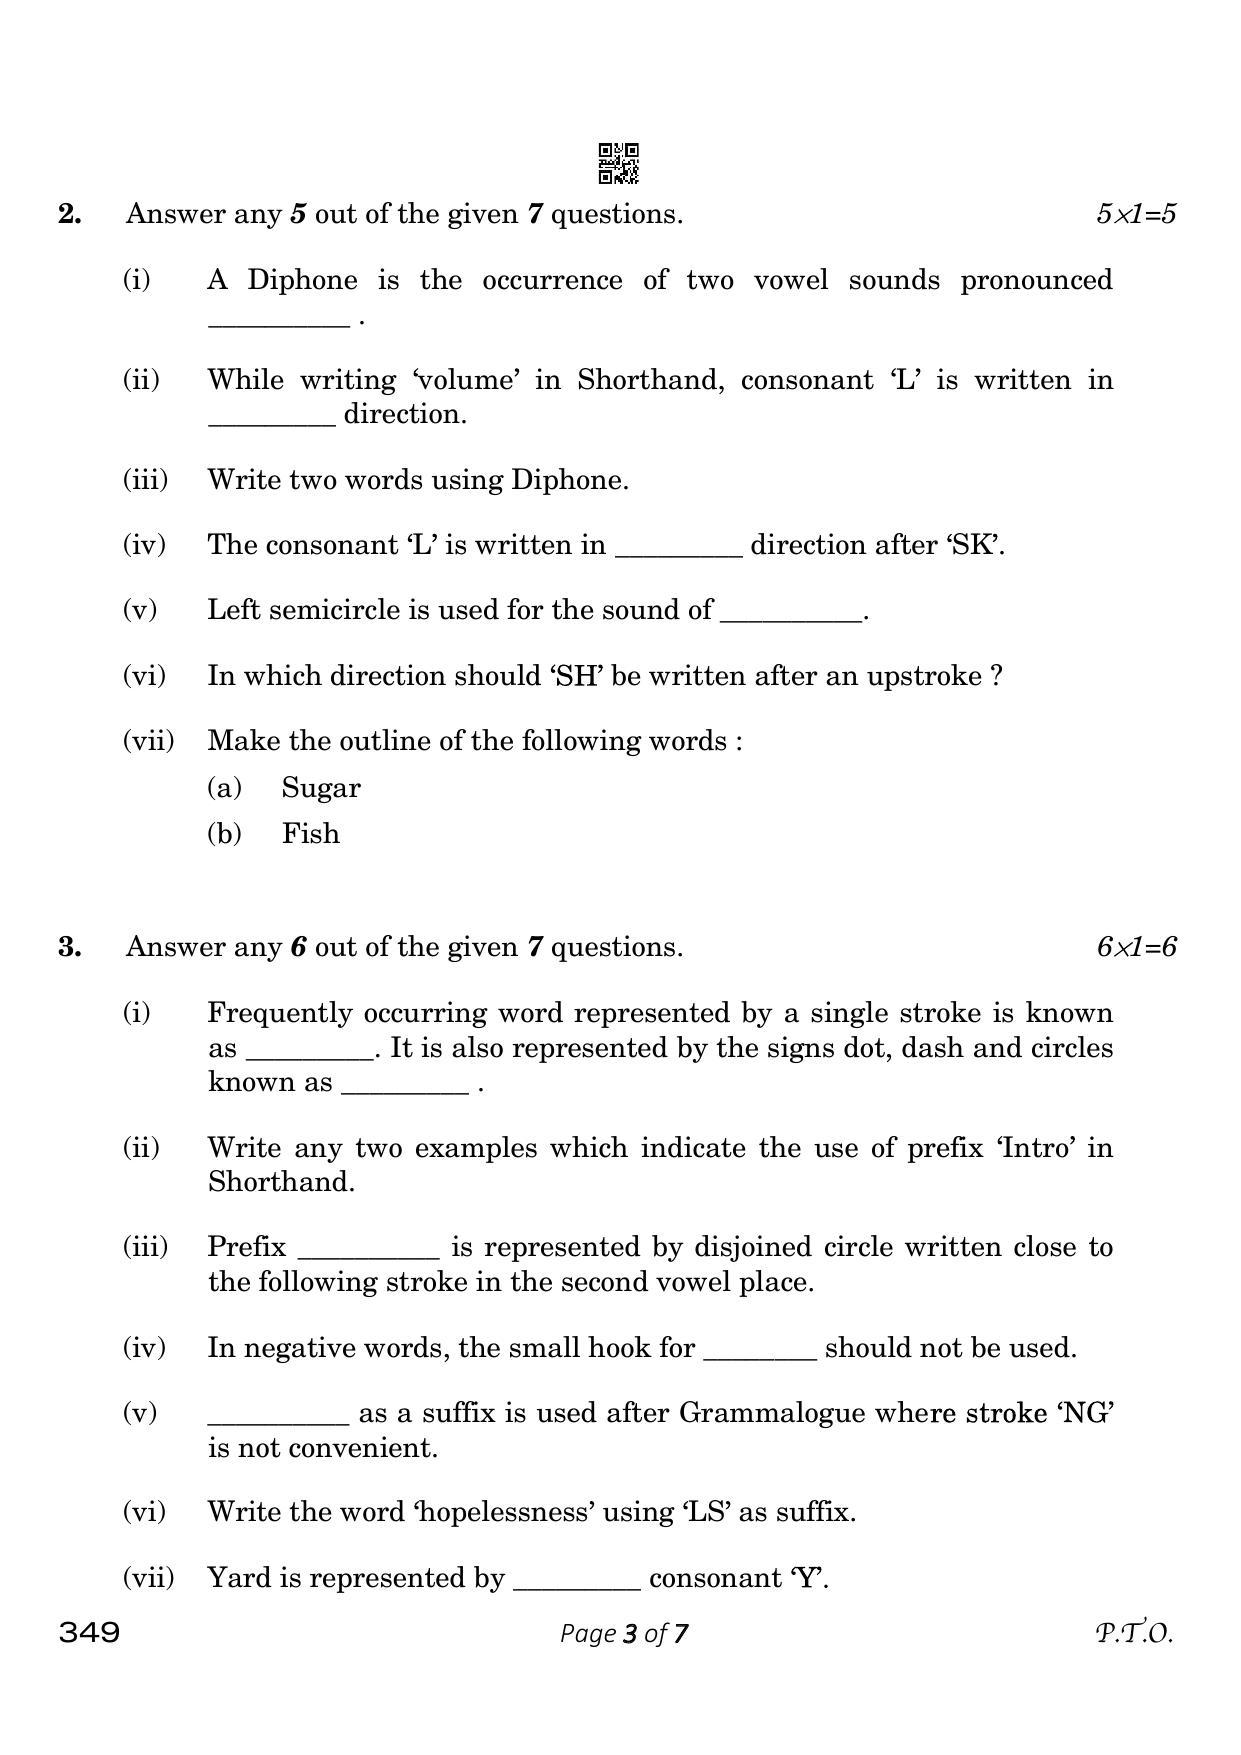 CBSE Class 12 349_Shorthand English 2023 Question Paper - Page 3